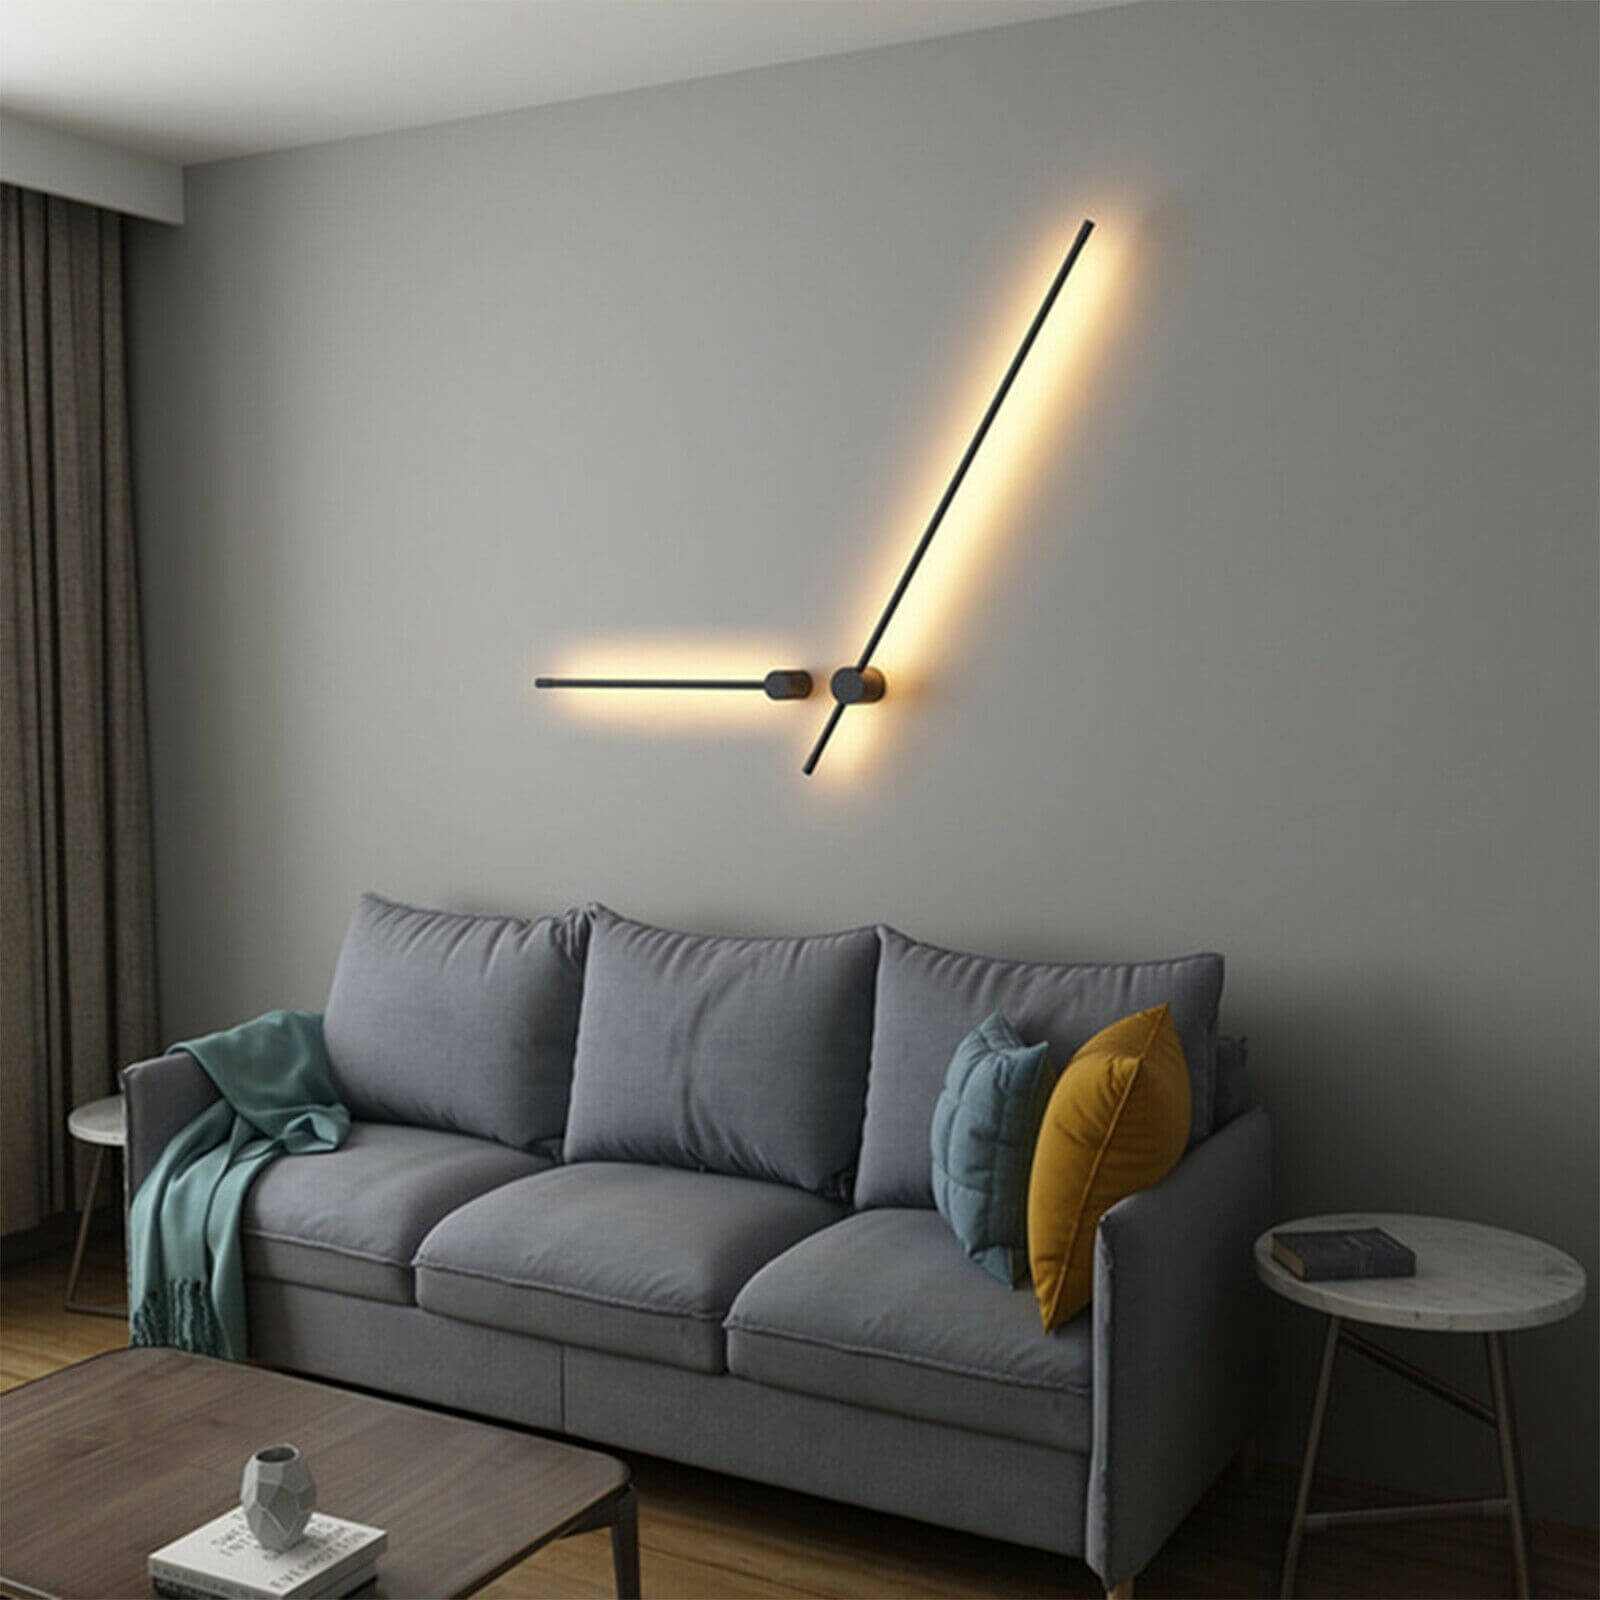 Showing of Modern LED Black Linear Wall Lamp